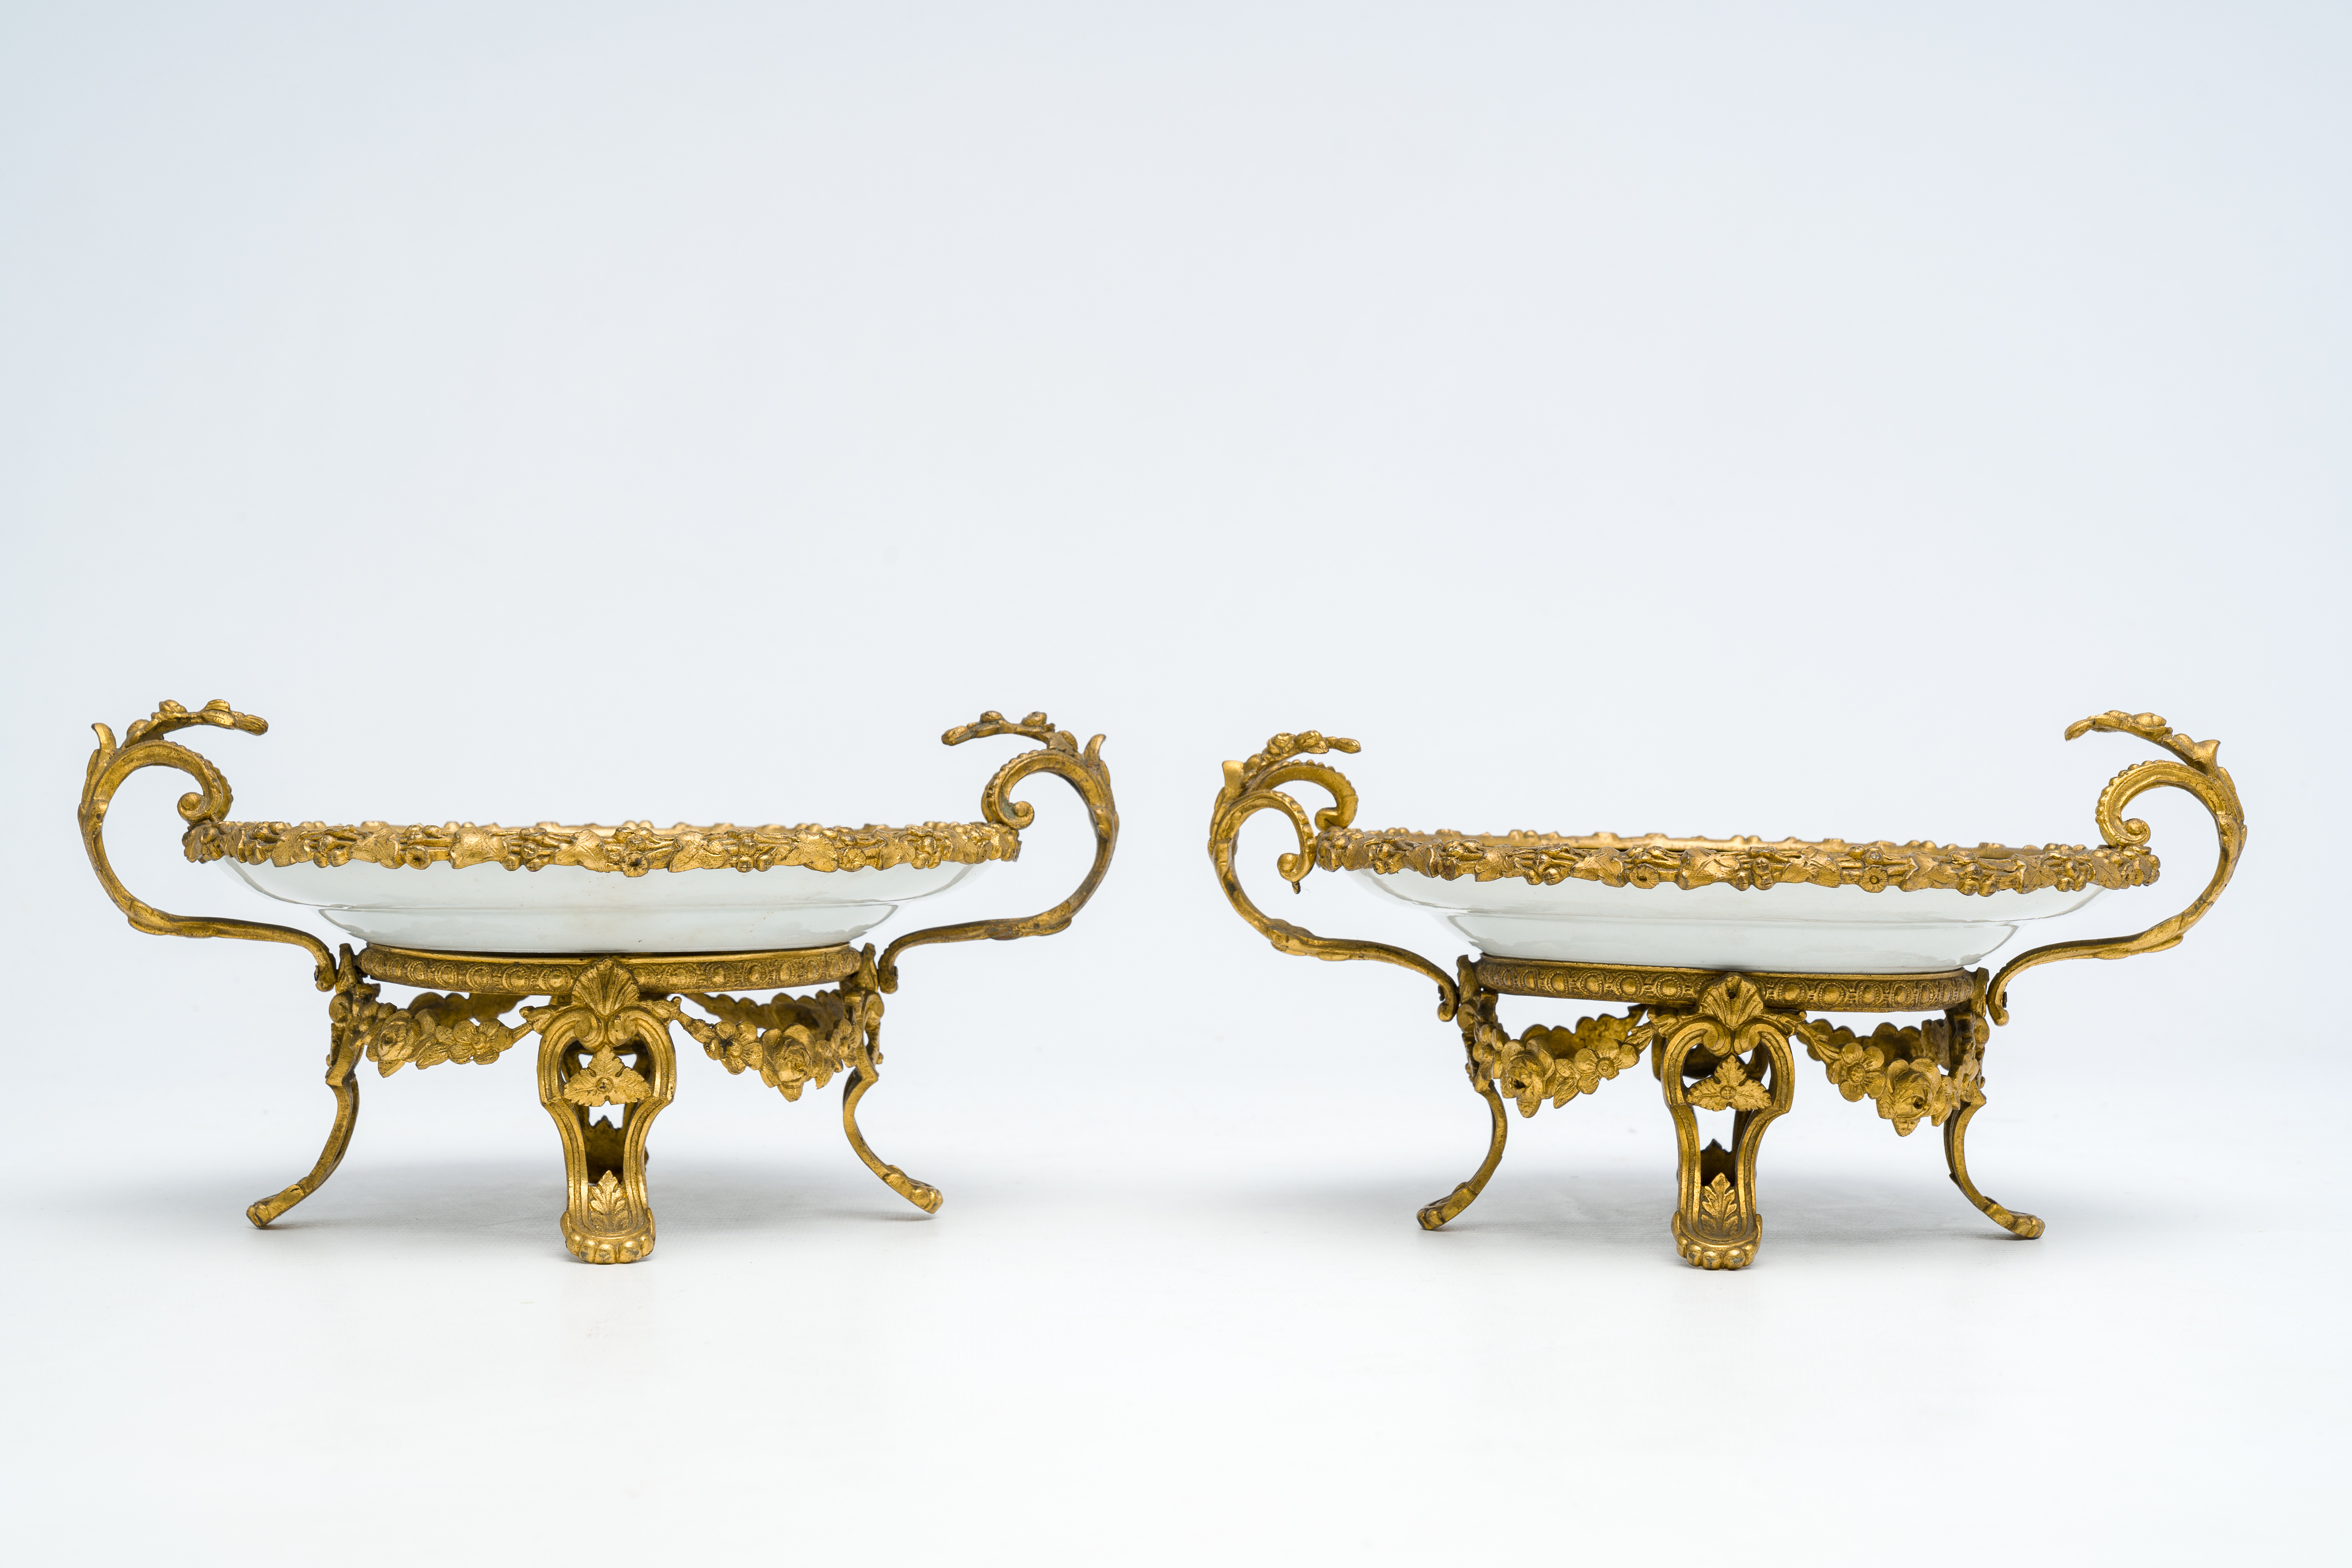 Two Chinese Canton famille rose gilt bronze mounted plates with figures on a terrace, 19th C. - Image 6 of 7